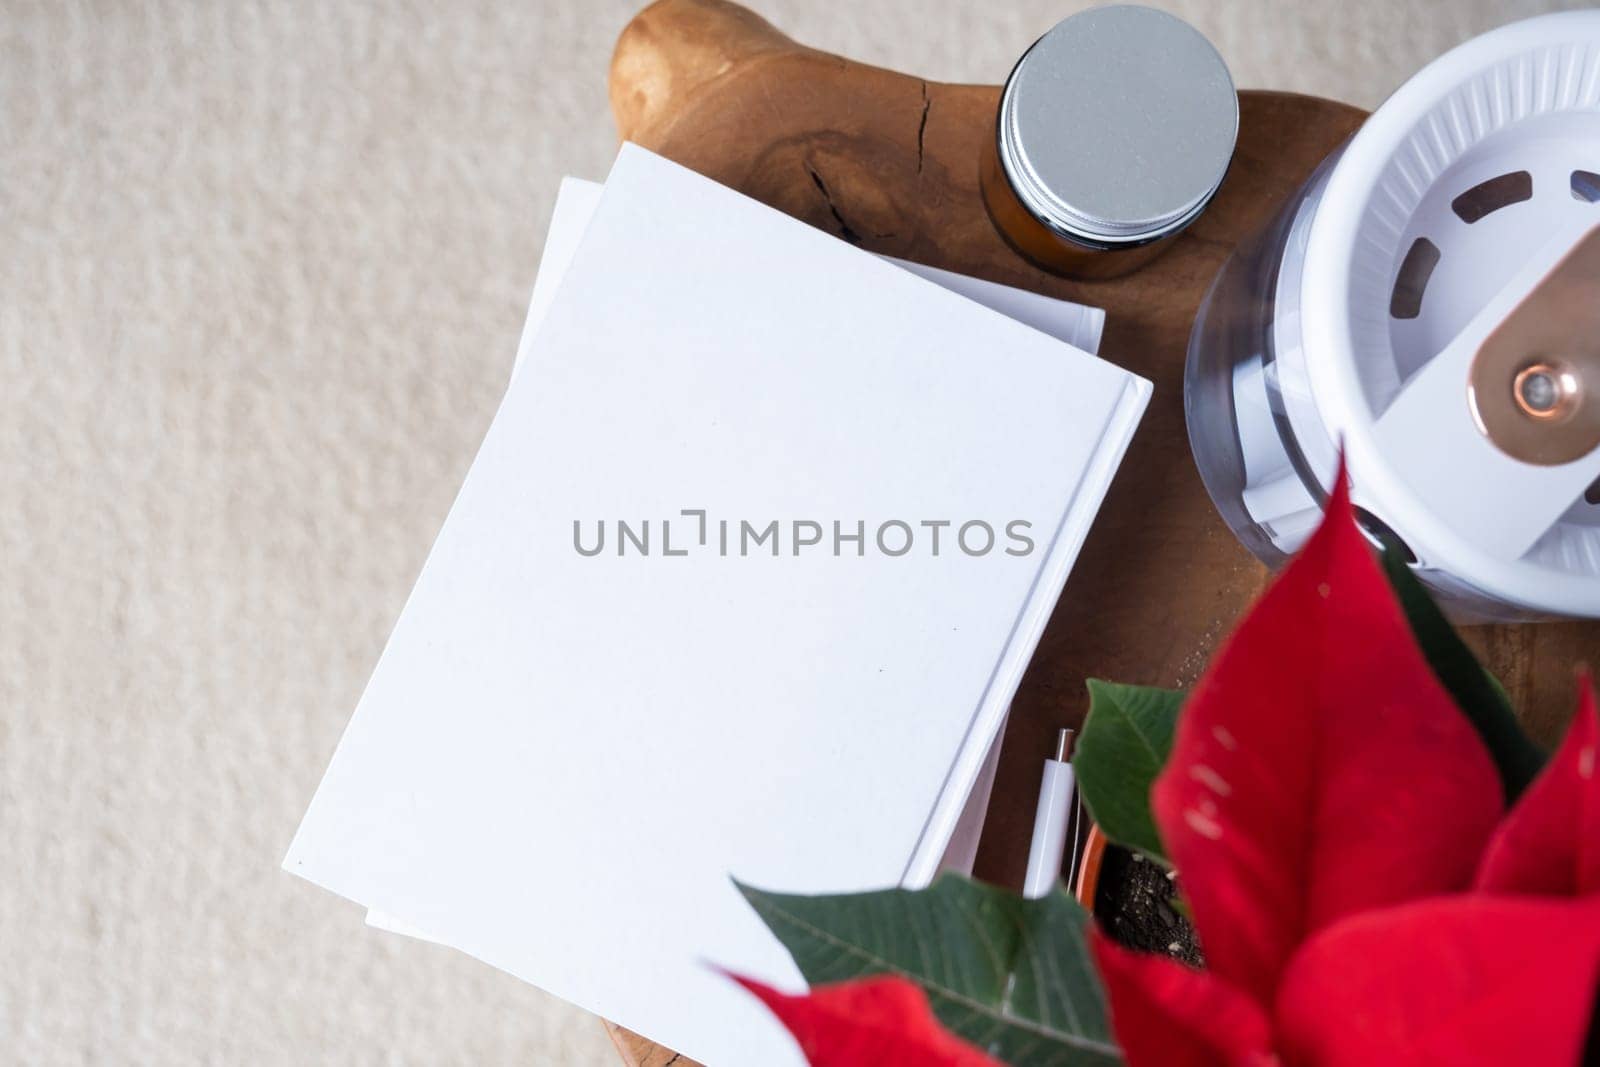 blank books for mockup design with pen and poinsettia plant